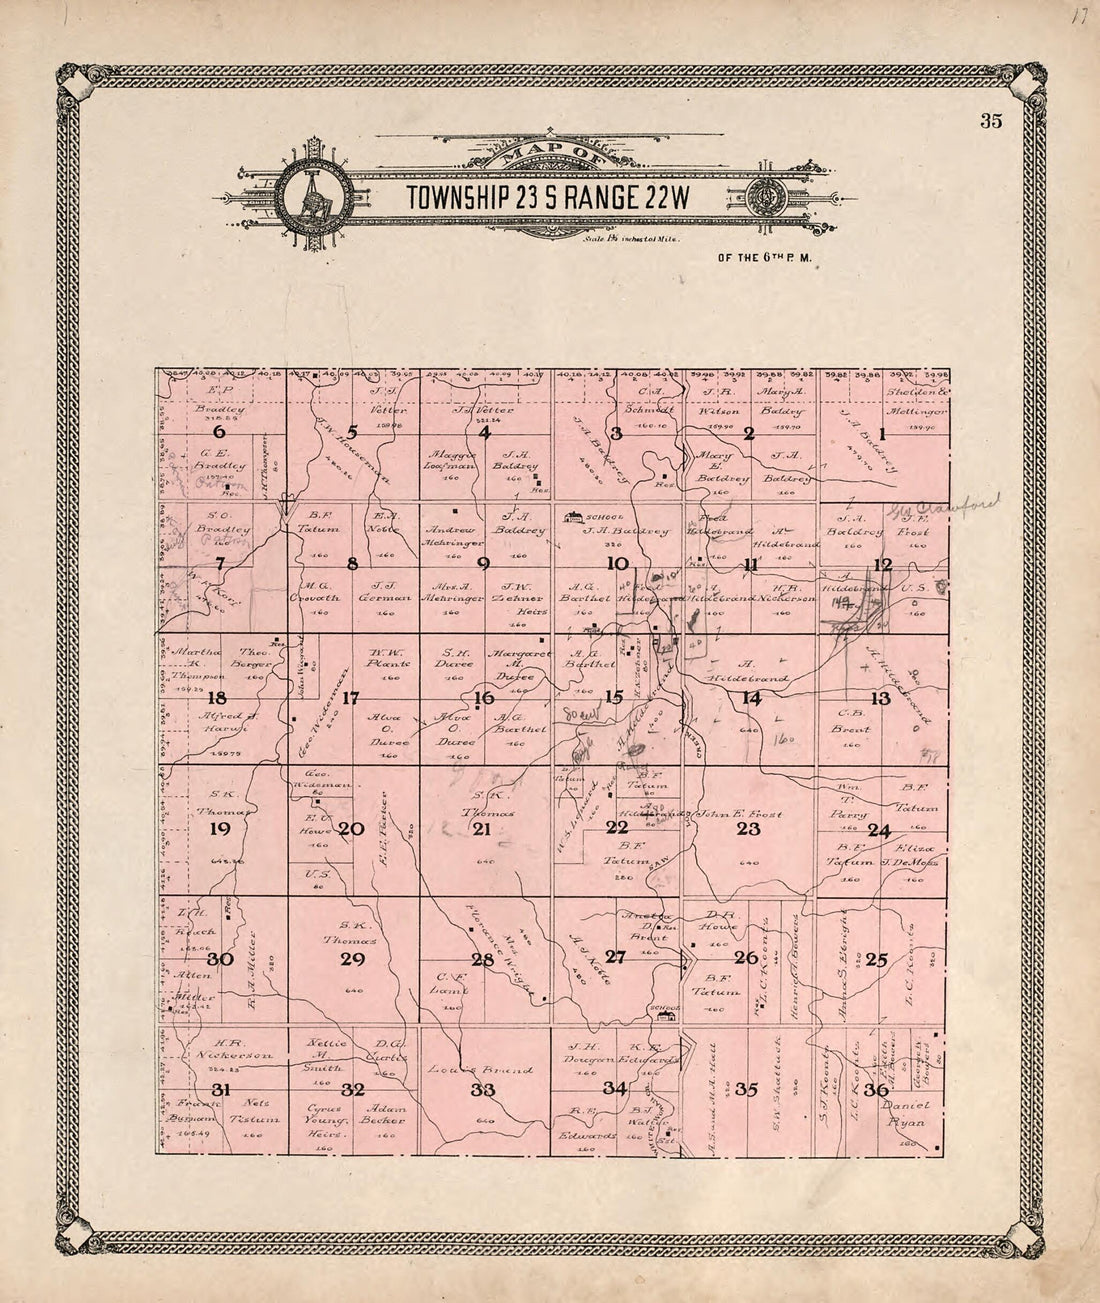 This old map of Map of Township 23 S Range 22 W from Standard Atlas of Hodgeman County, Kansas from 1907 was created by  Geo. A. Ogle &amp; Co in 1907